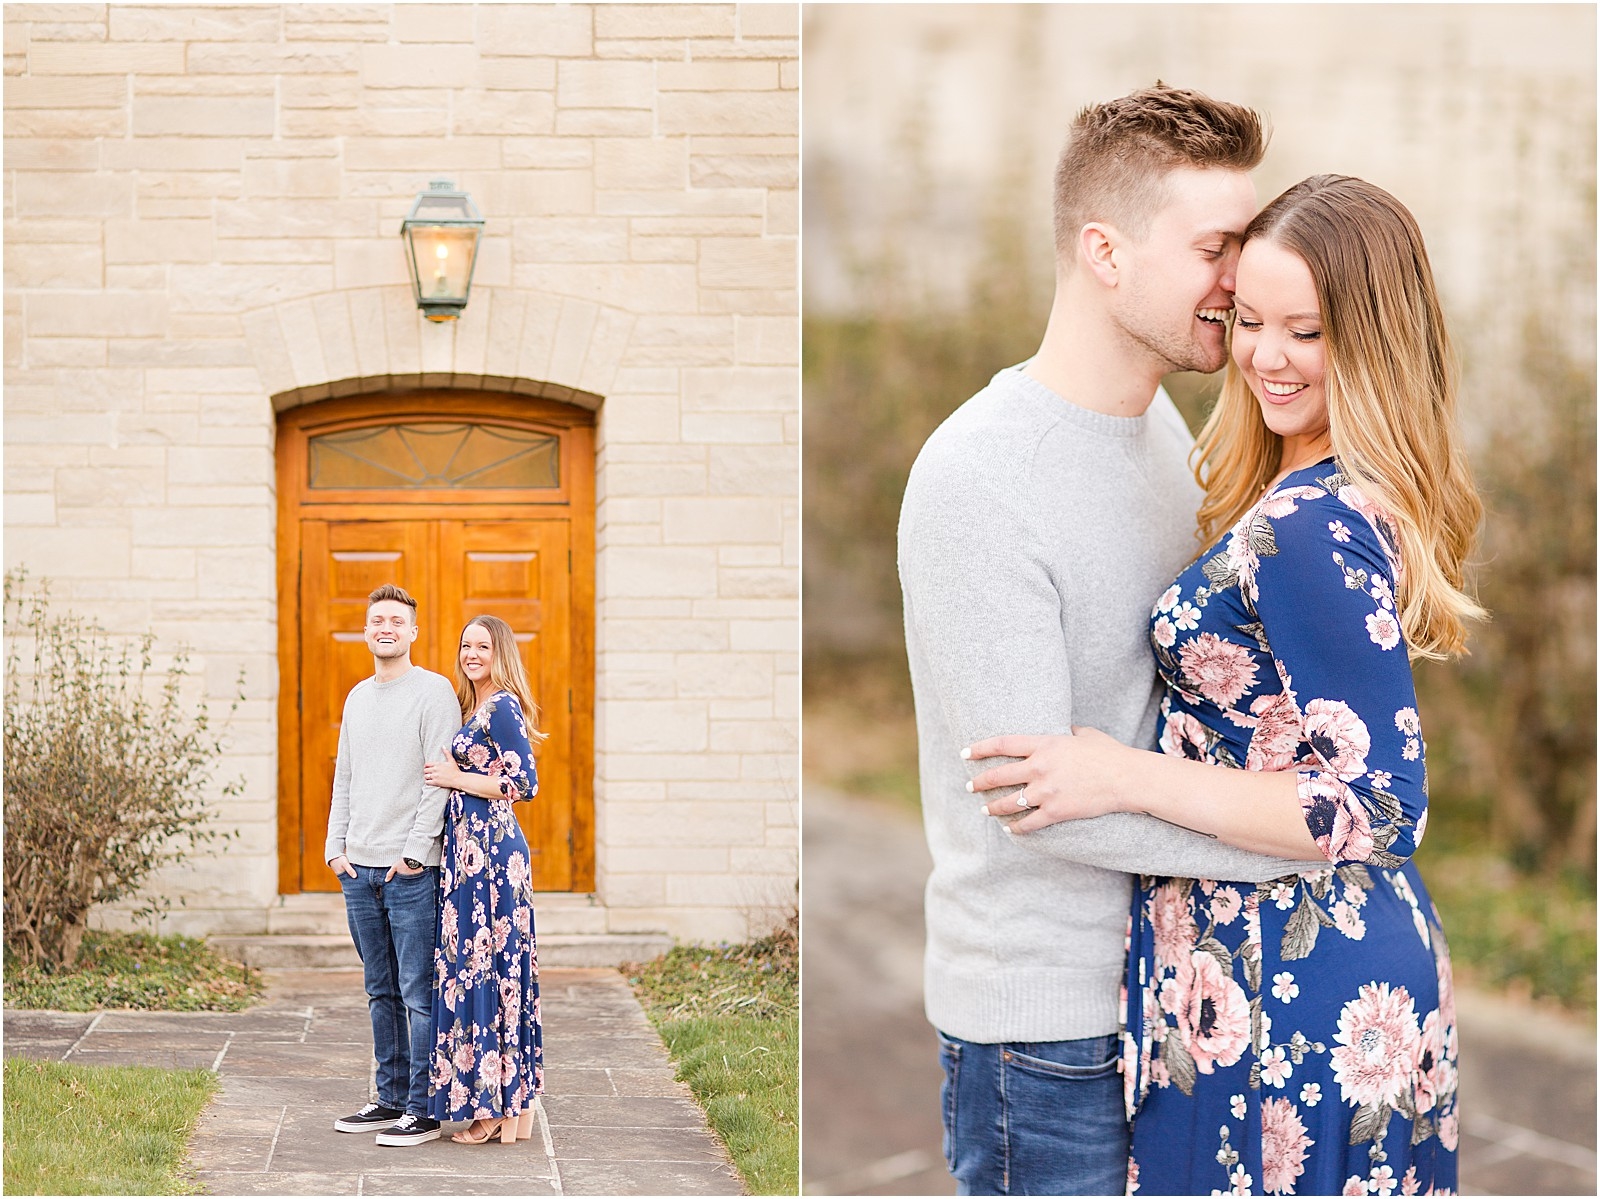 Rachel and Nick | Lincoln State Park Engagement Session 023.jpg